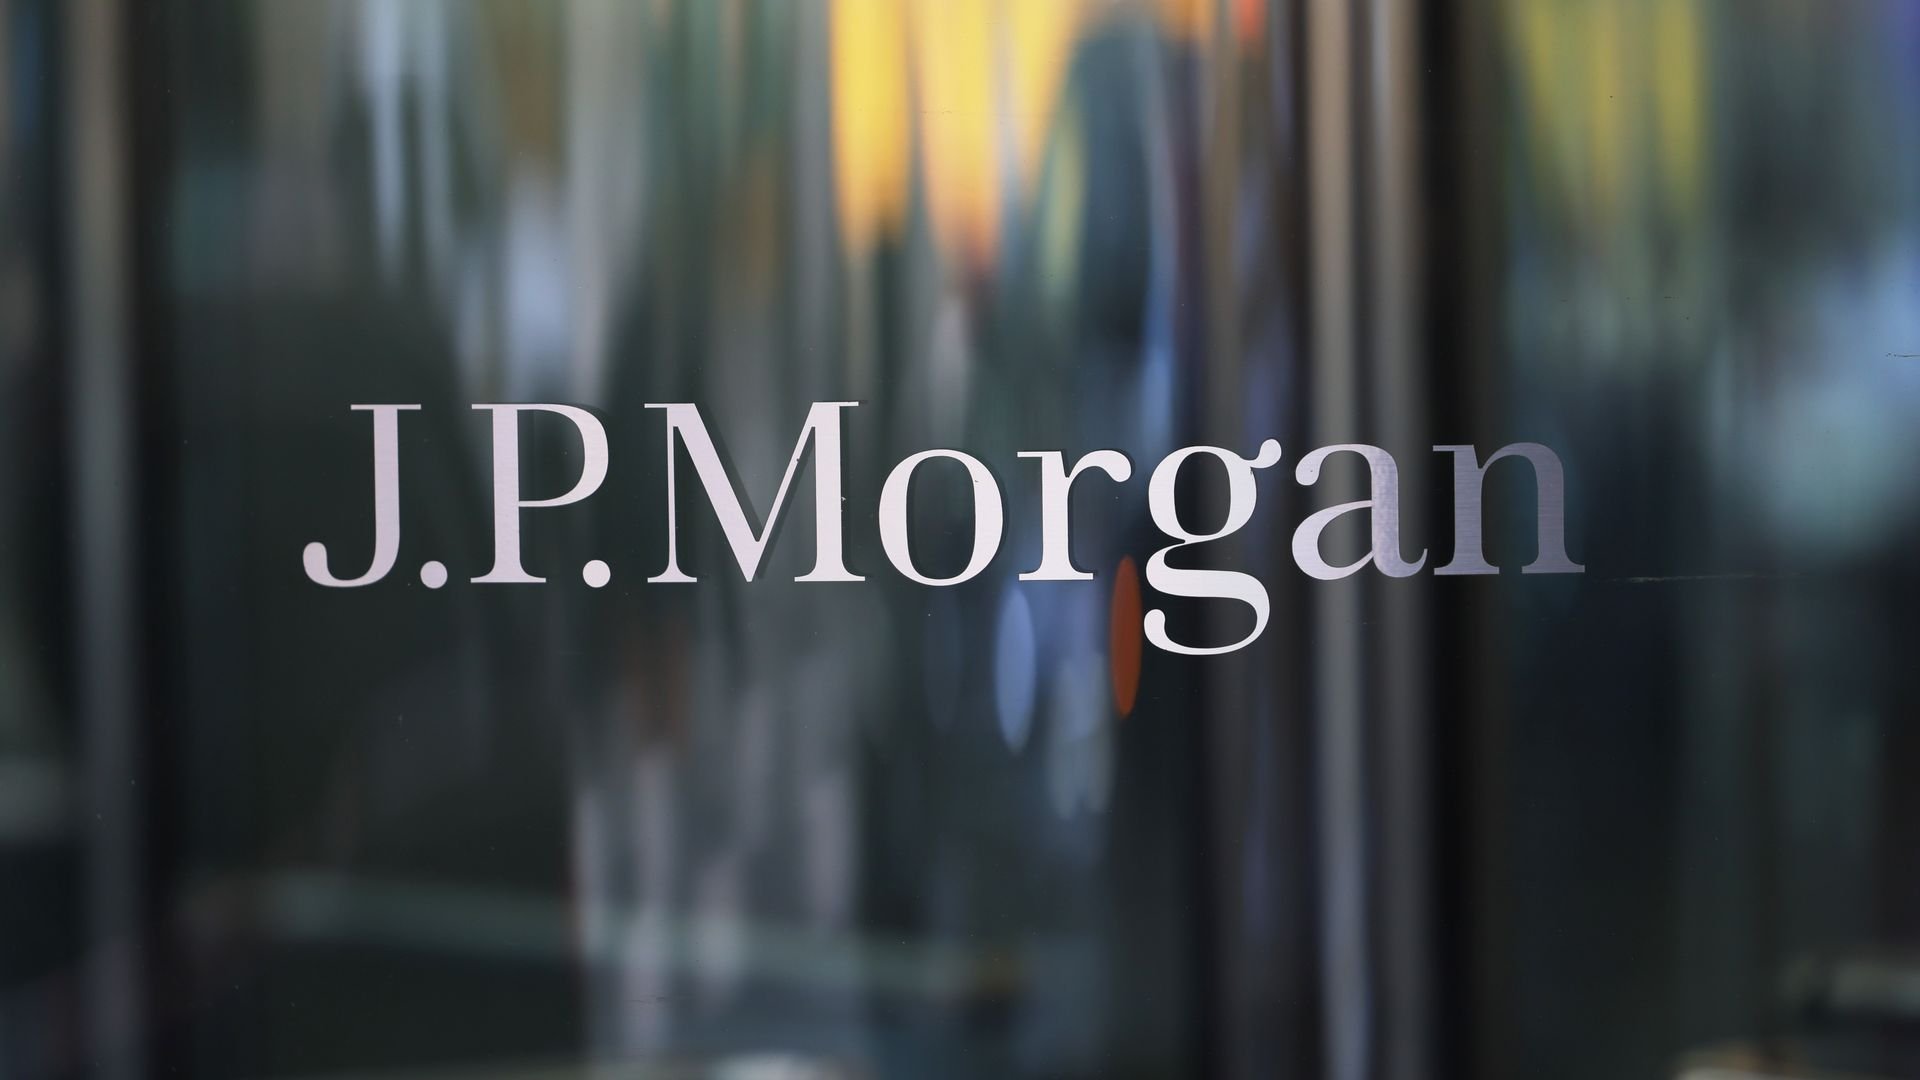 JPMorgan Chase agrees to settle class action suit with Epstein survivors